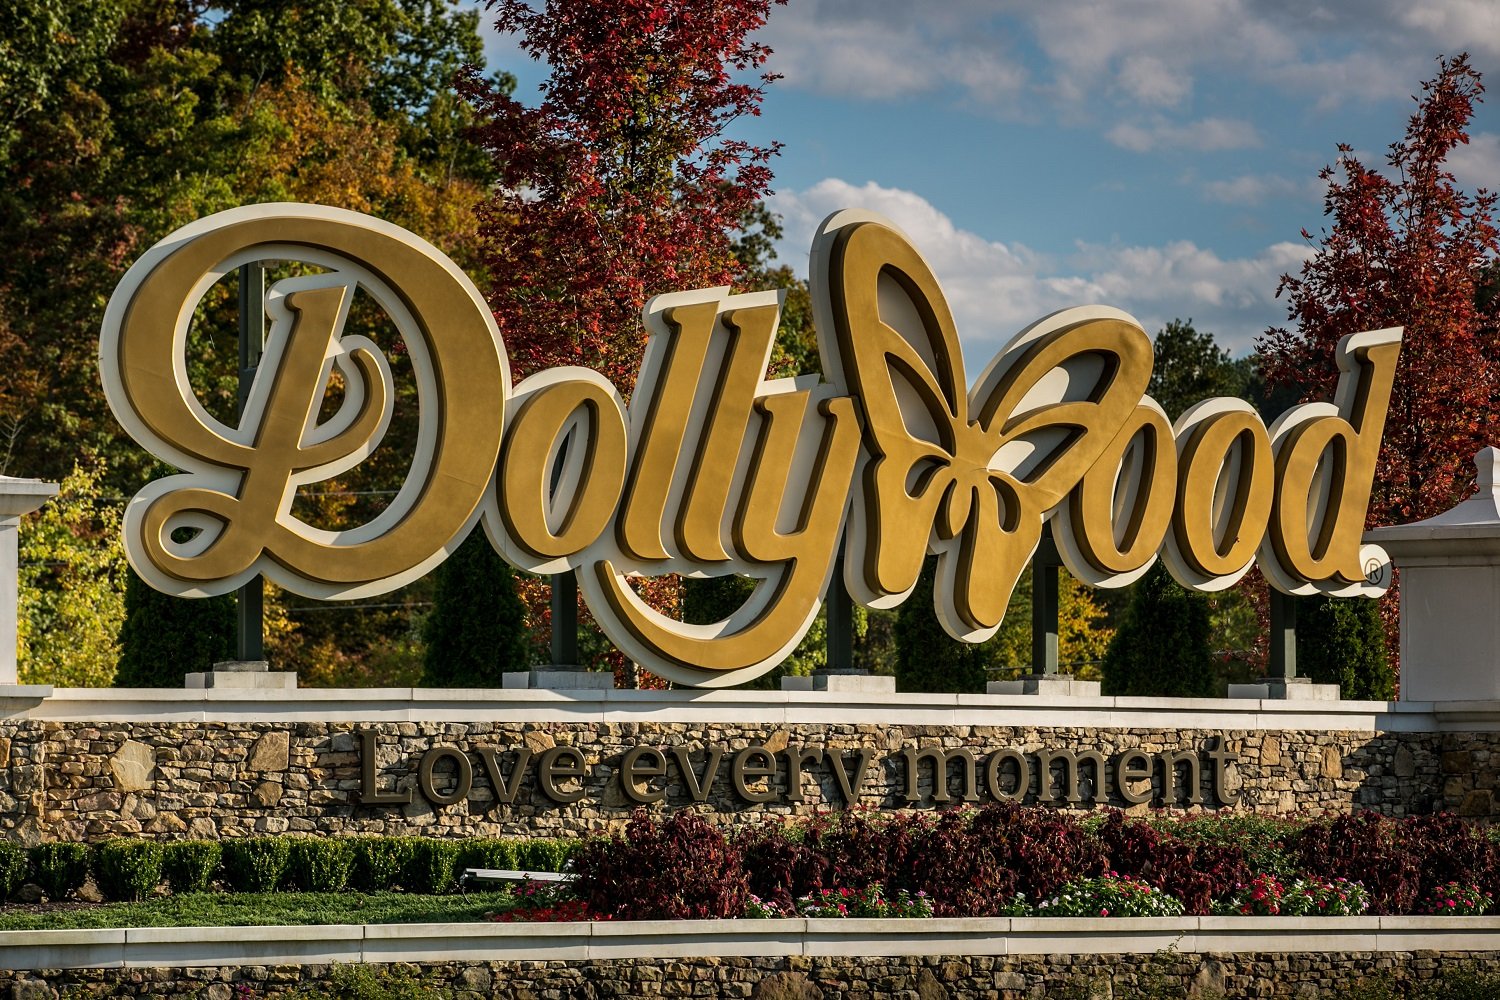 The entrance to Dollywood